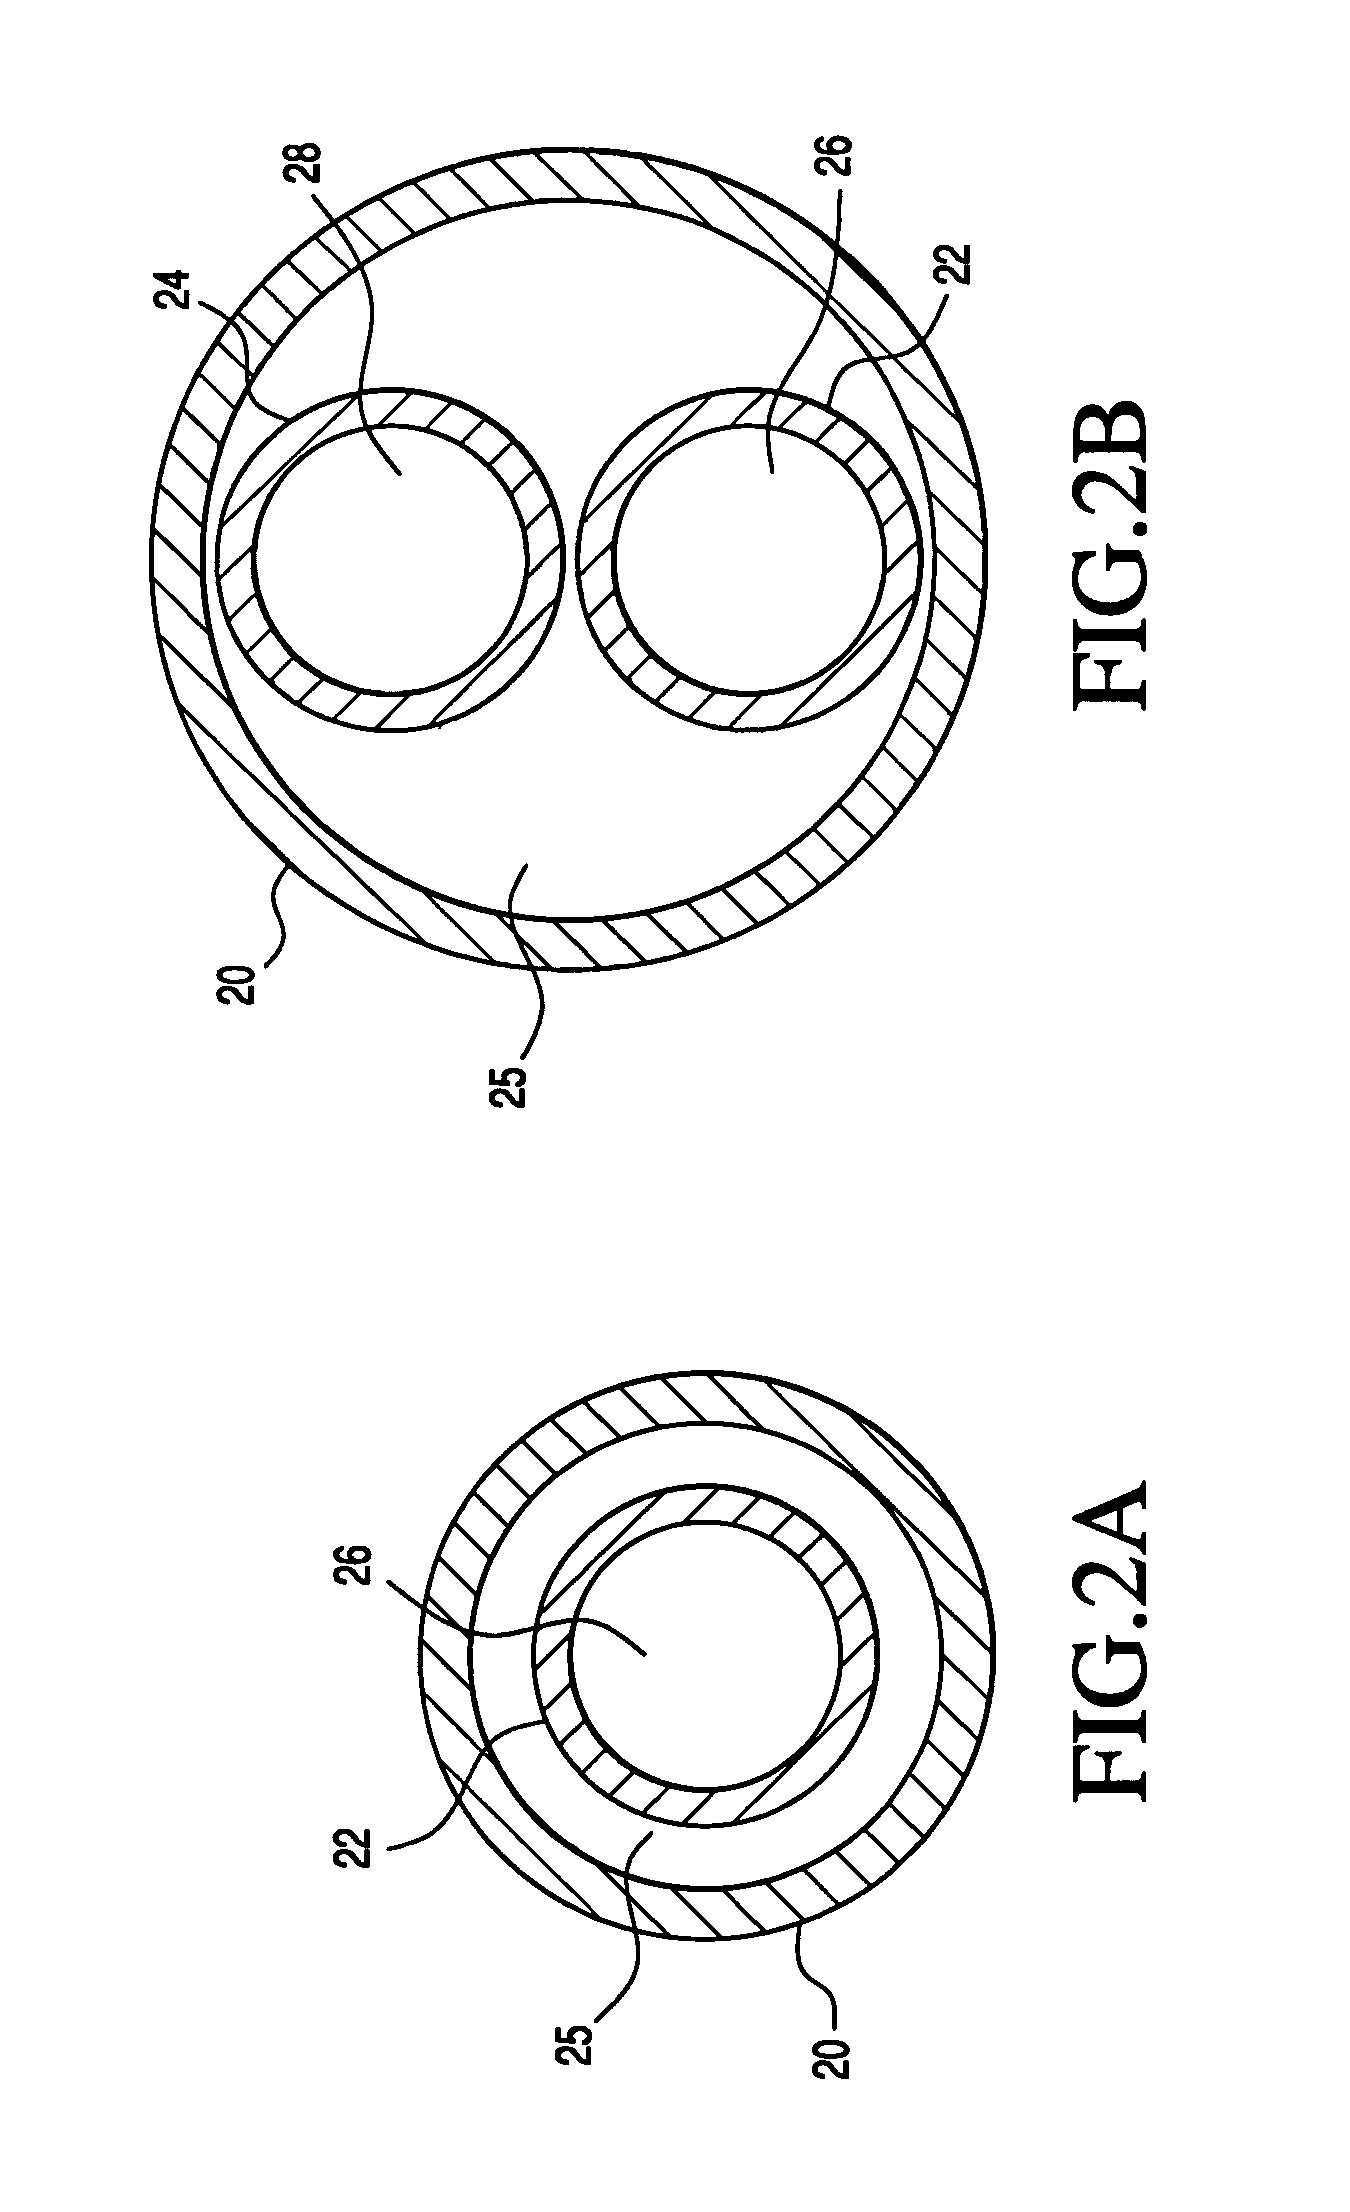 Catheter having an auxiliary lumen for use with a functional measurement wire